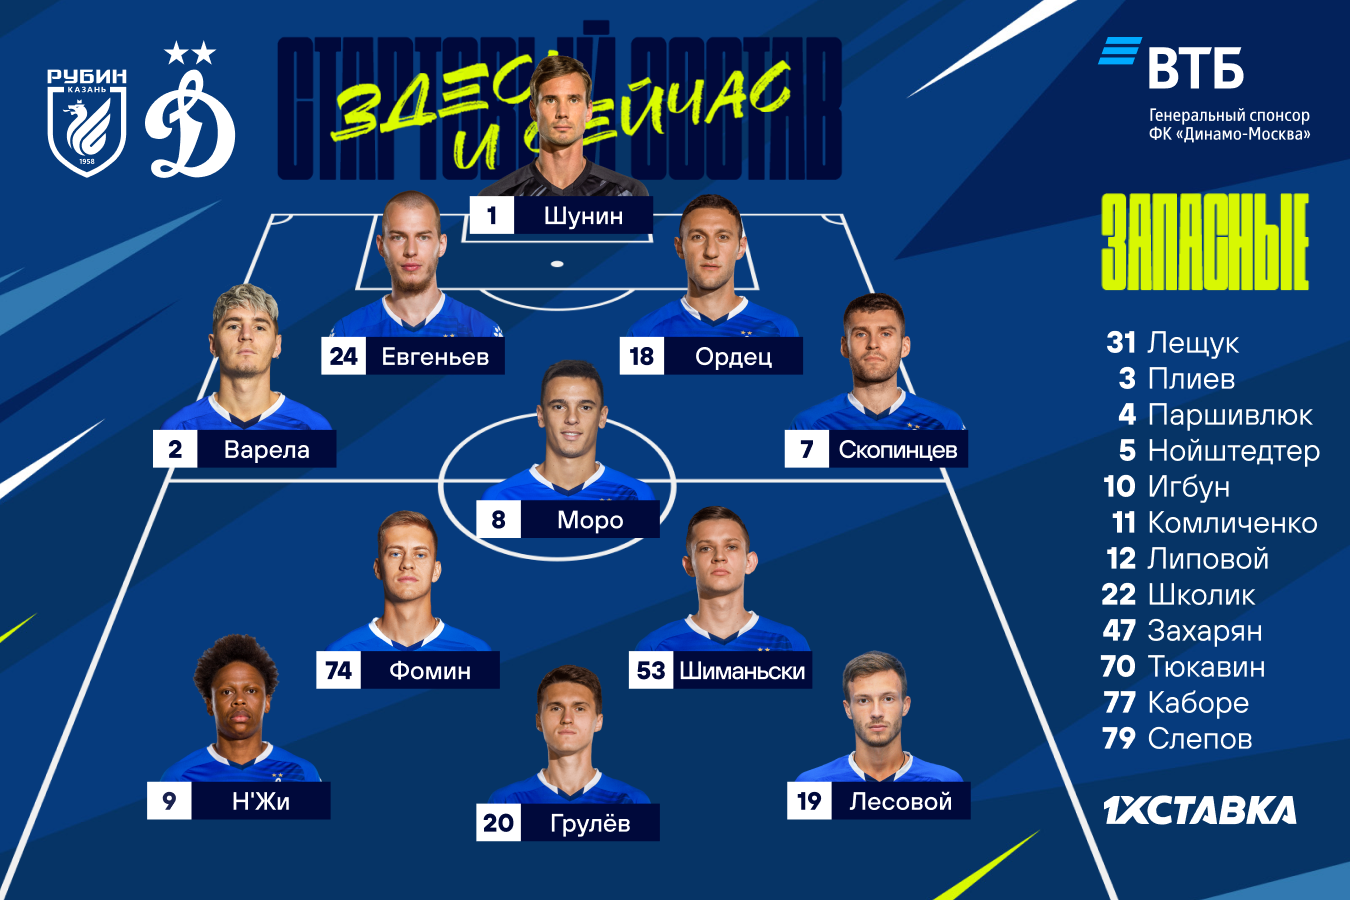 Skopintsev and N'Jie entered the starting line-up for the match against Rubin